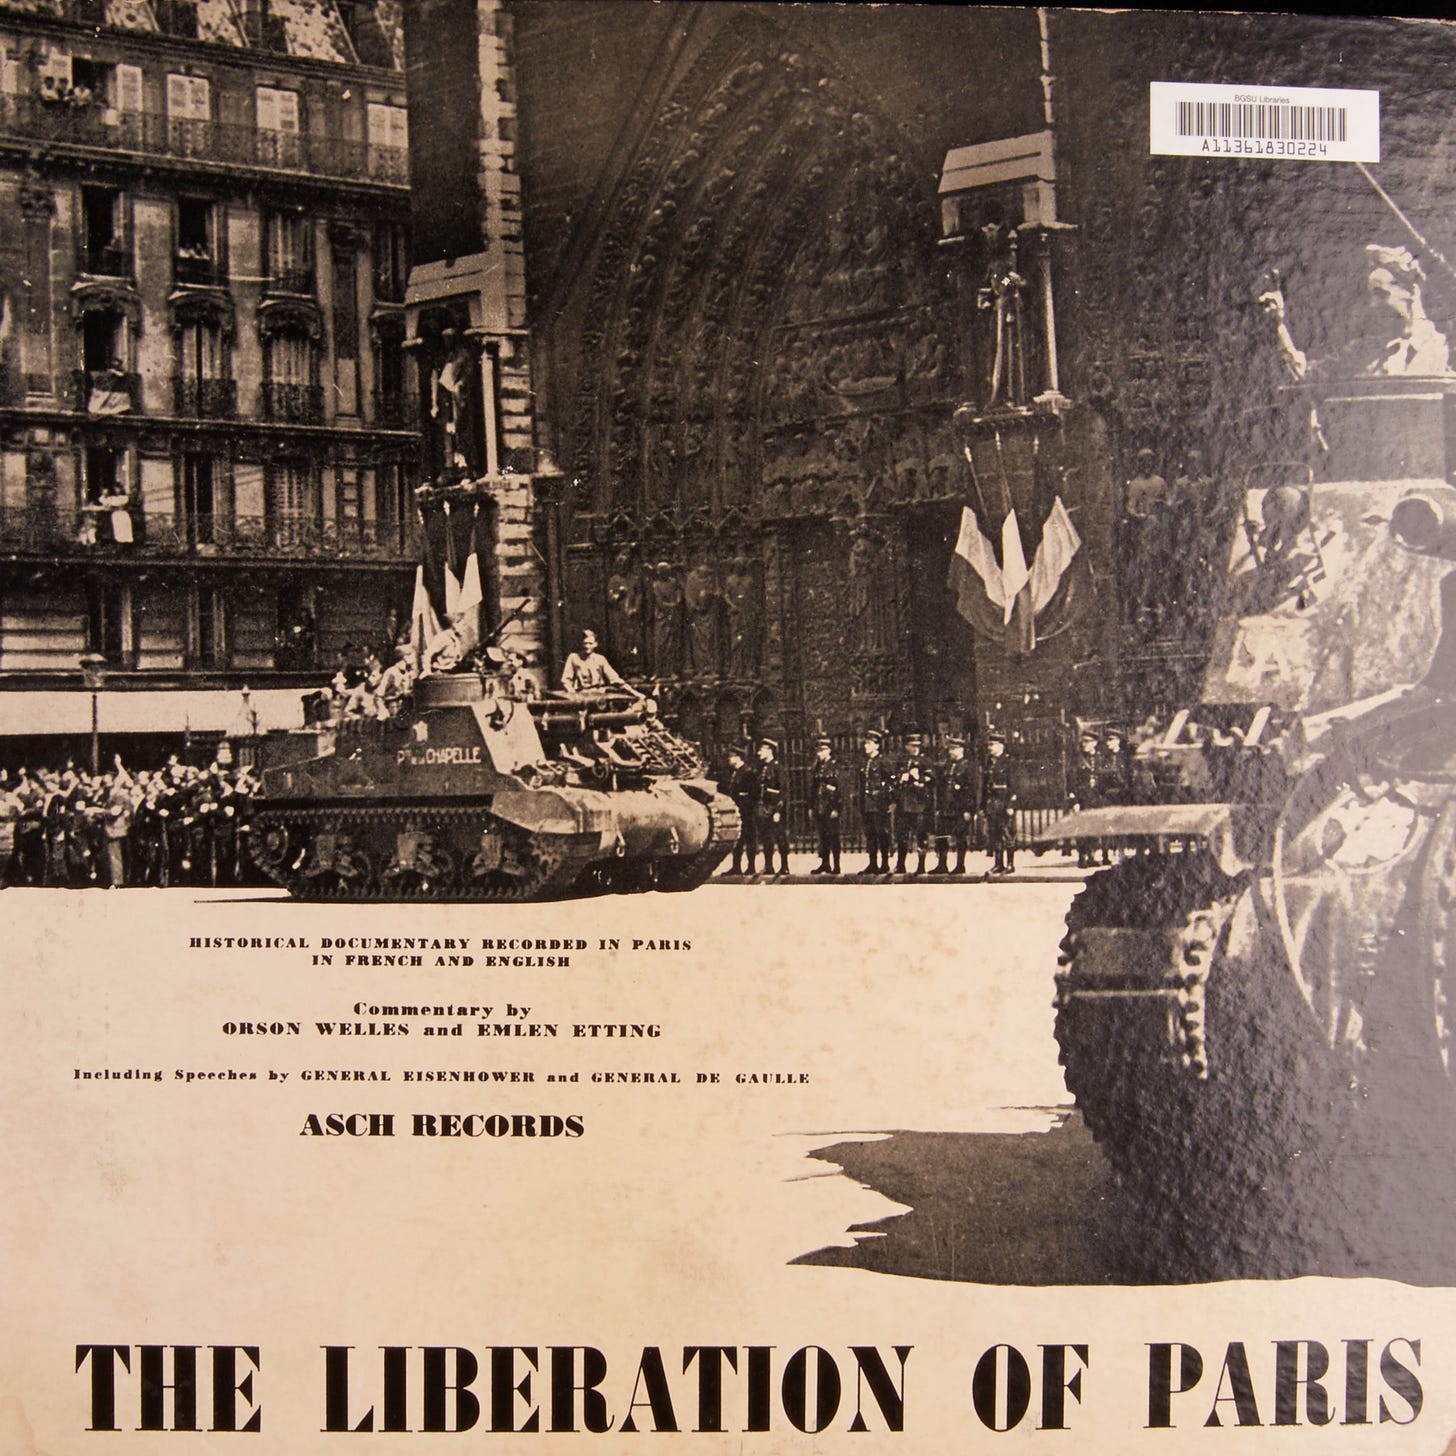 primary image for 78_the-liberation-of-paris-part-2_orson-welles-and-emlen-etting-anne-marly-paul-elua_gbia8002982